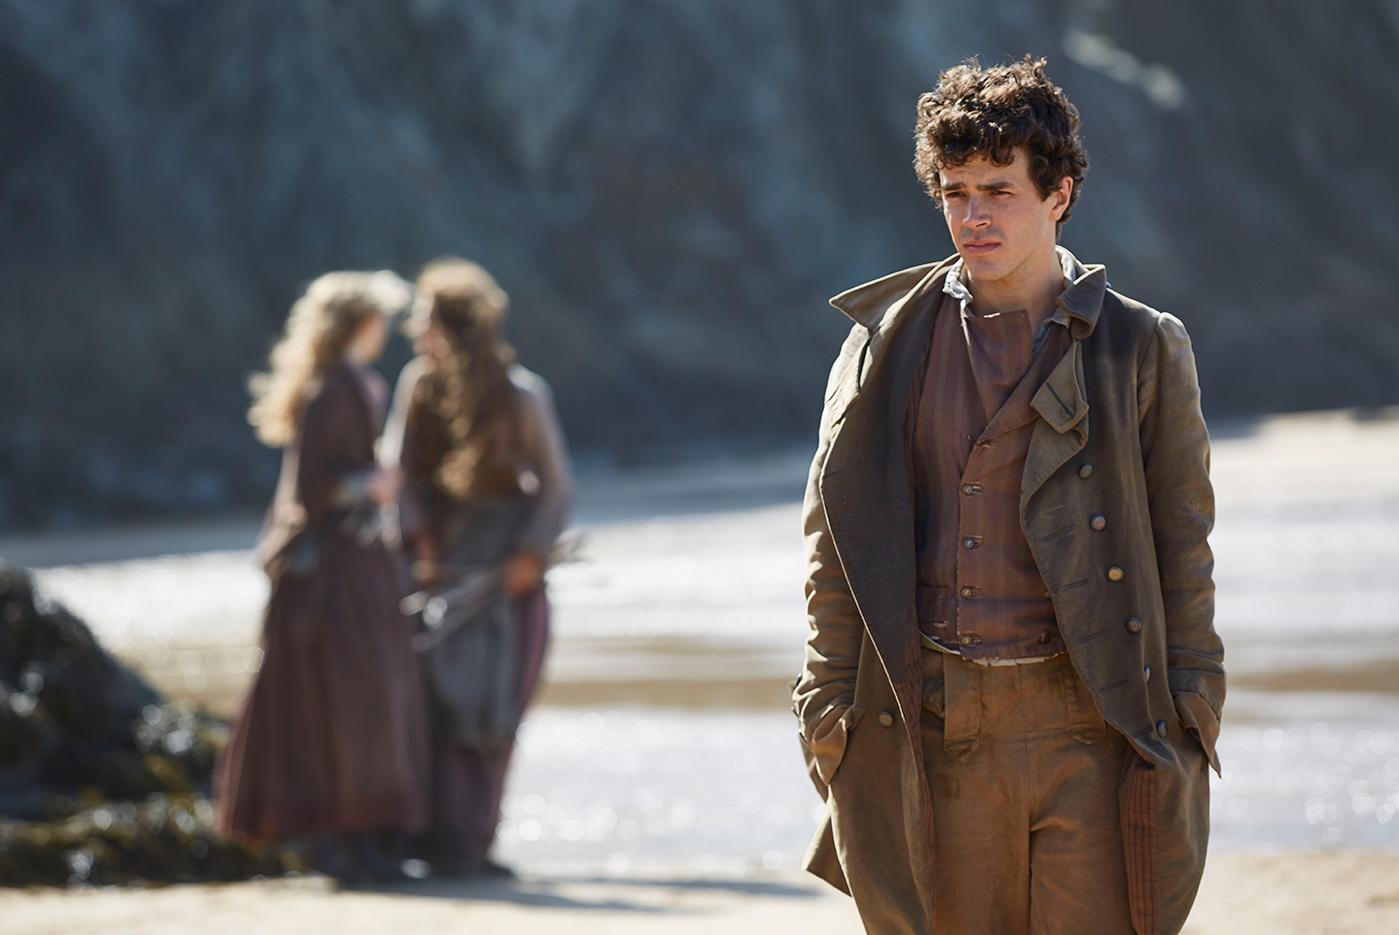 Harry Richardson as Drake in Poldark. Photo: Mammoth Screen for BBC and MASTERPIECE